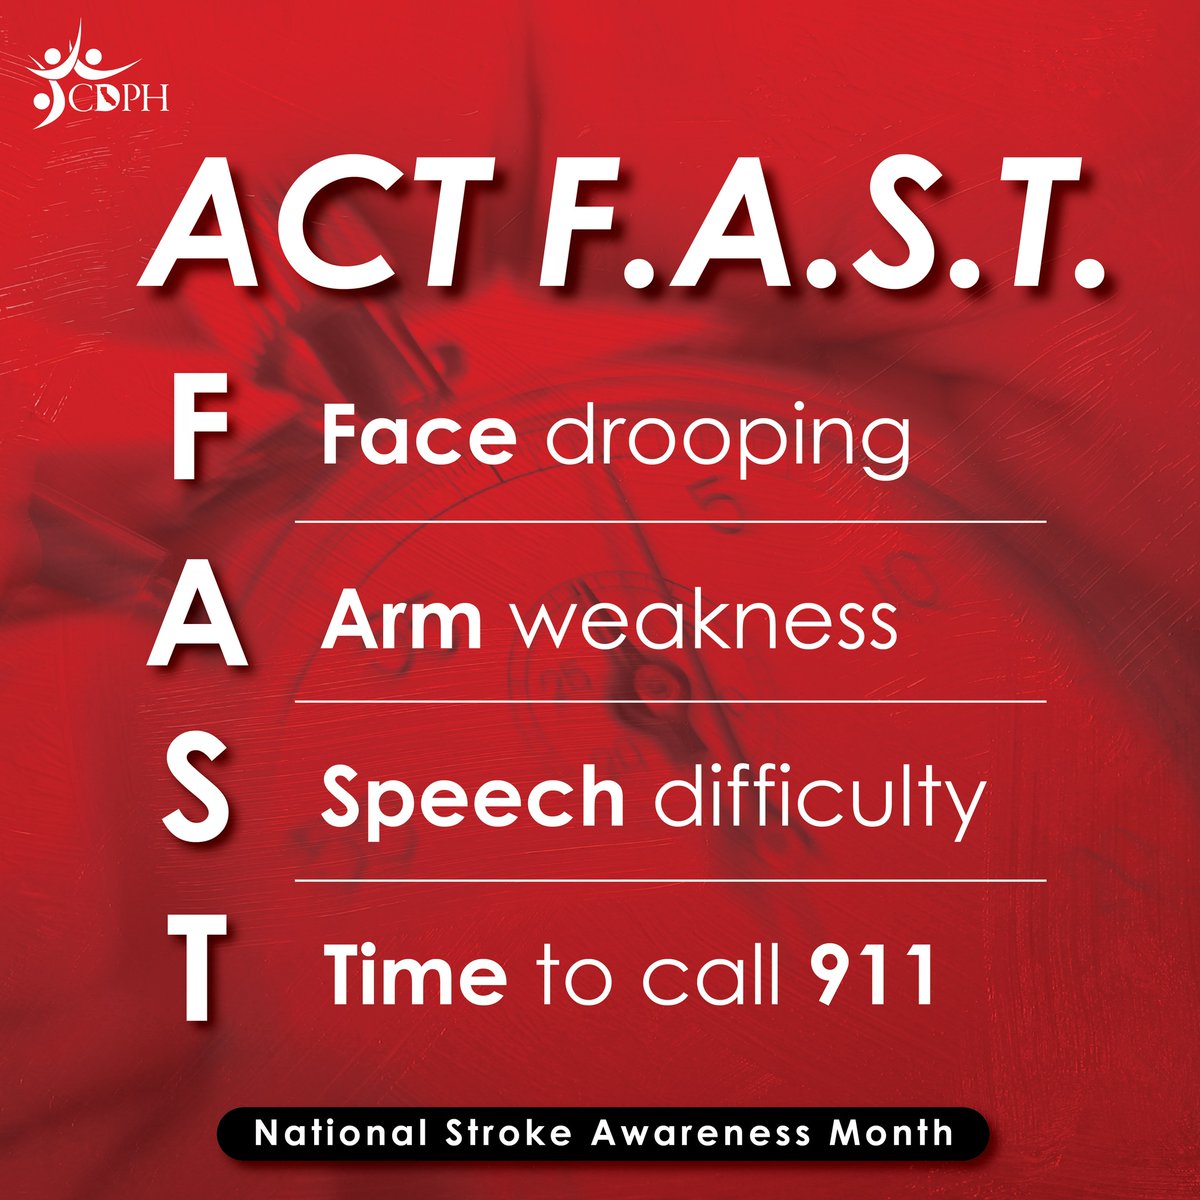 May is National Stroke Awareness Month. A stroke occurs when something blocks blood supply to part of the brain or when a blood vessel in the brain bursts. Know the F.A.S.T. signs of stroke to prevent death and disability, and act fast! Learn More: cdc.gov/stroke/signs_s…